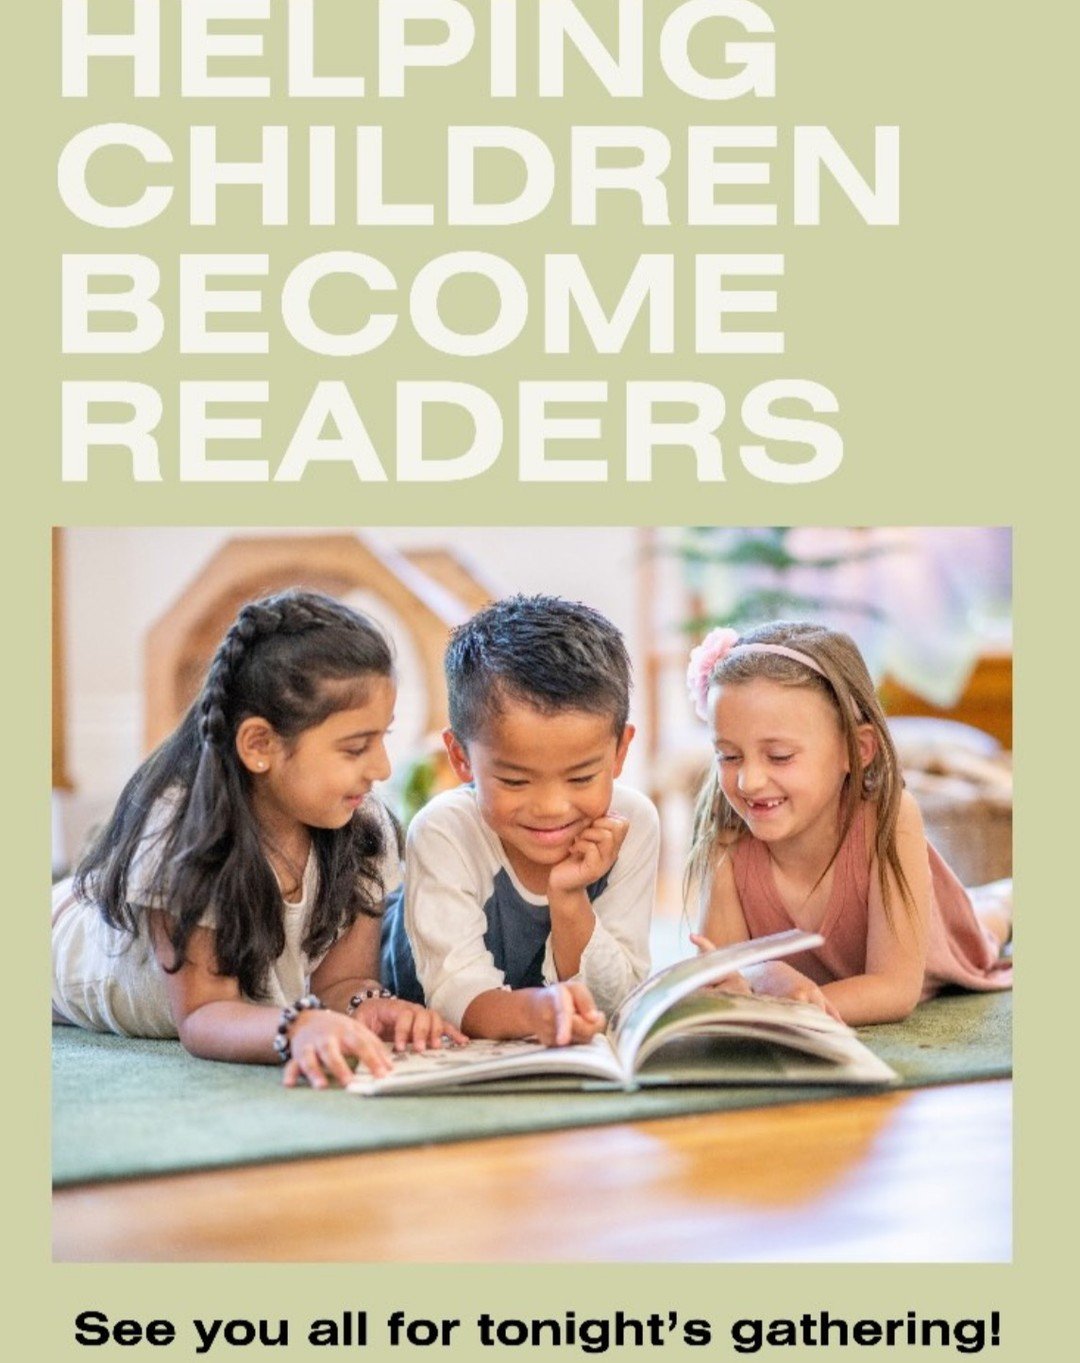 I'm so happy to be talking with Montessori educators tonight about helping children become readers. If you know a Montessori guide who is looking for the opportunity to grow and connect in good company, the Primary Learning Community at the Montessor